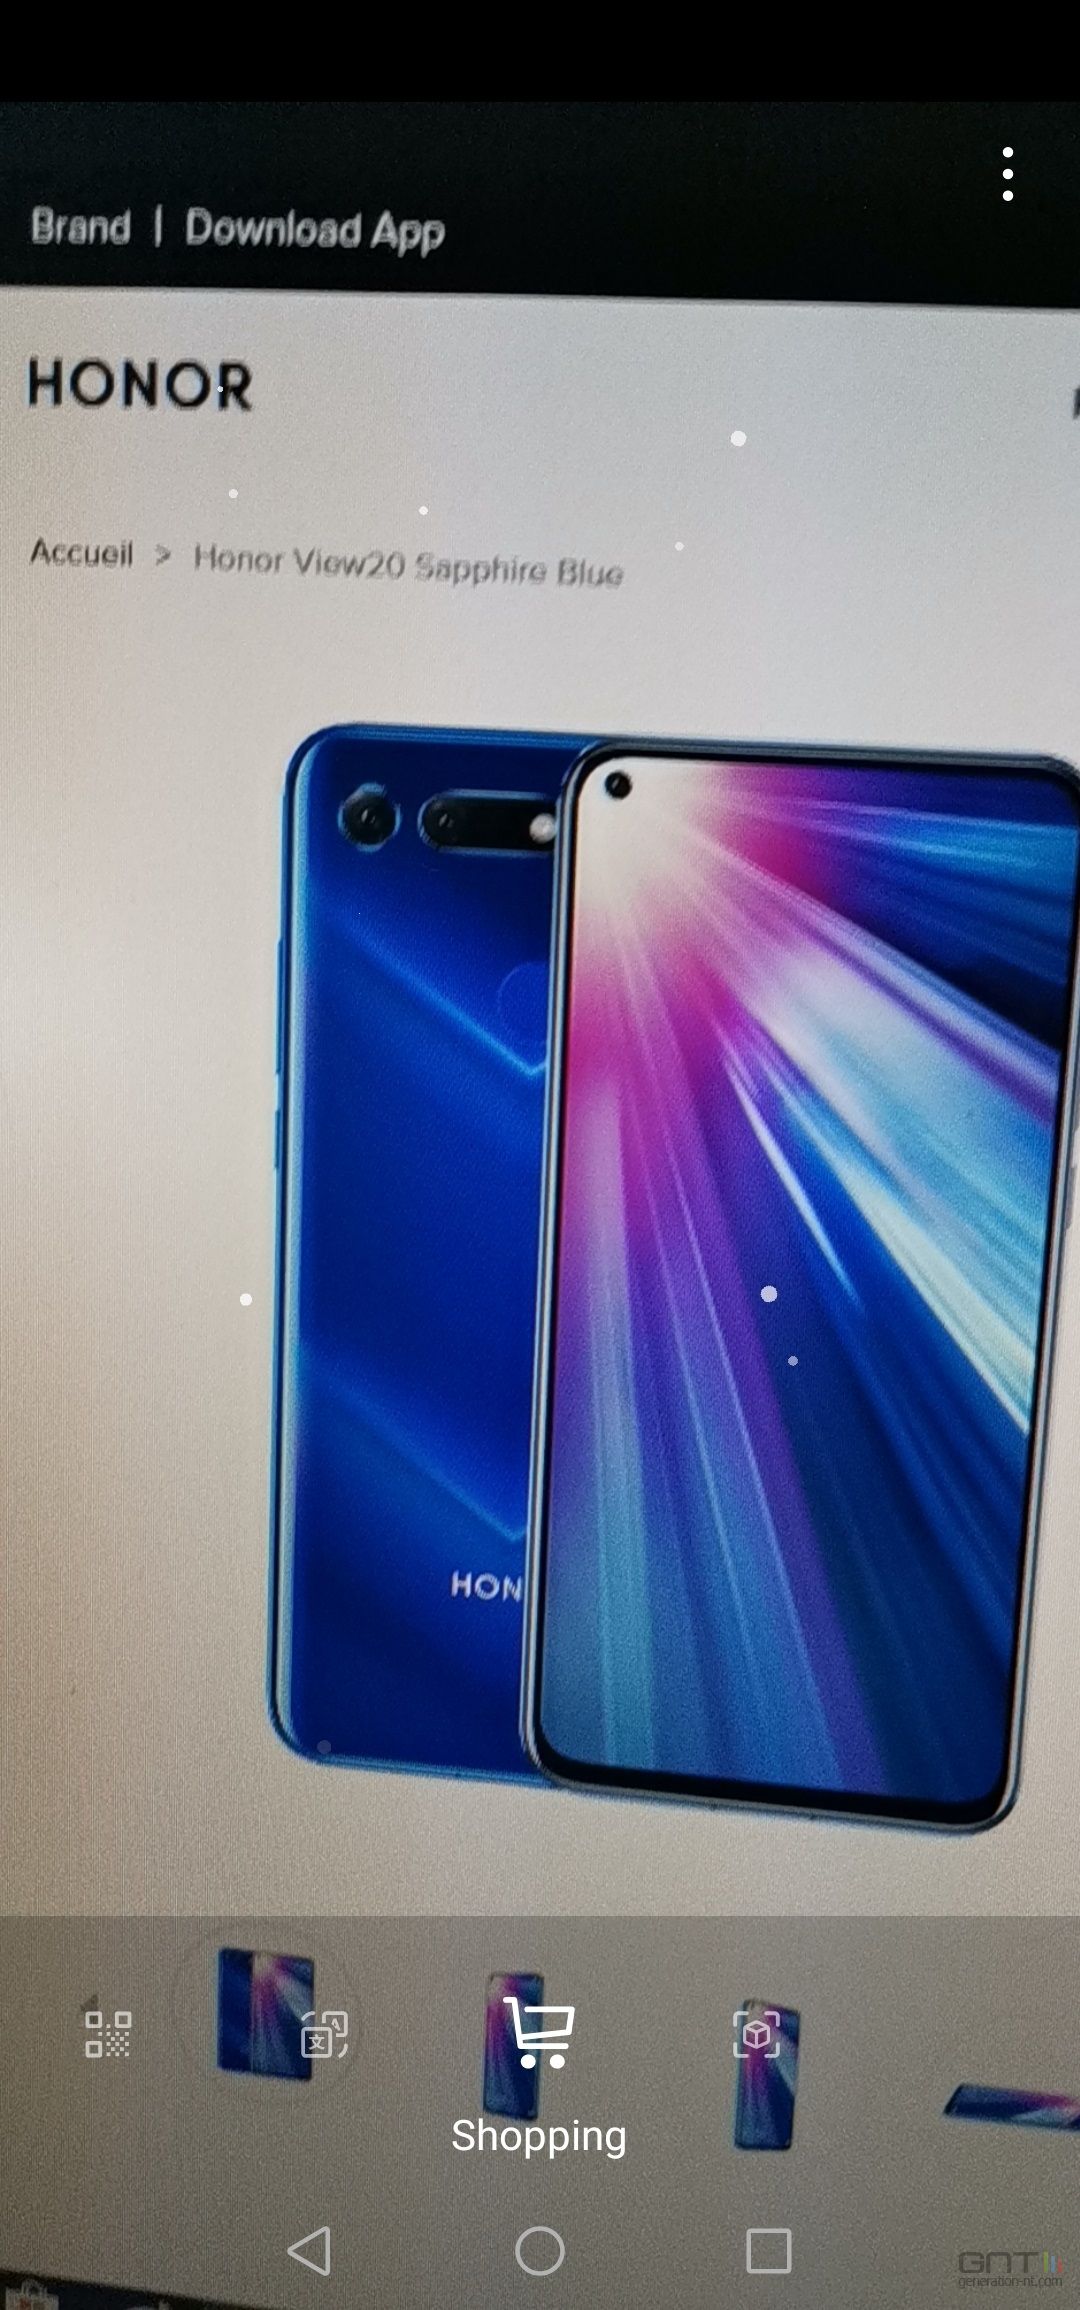 Honor View 20 photo interface 02